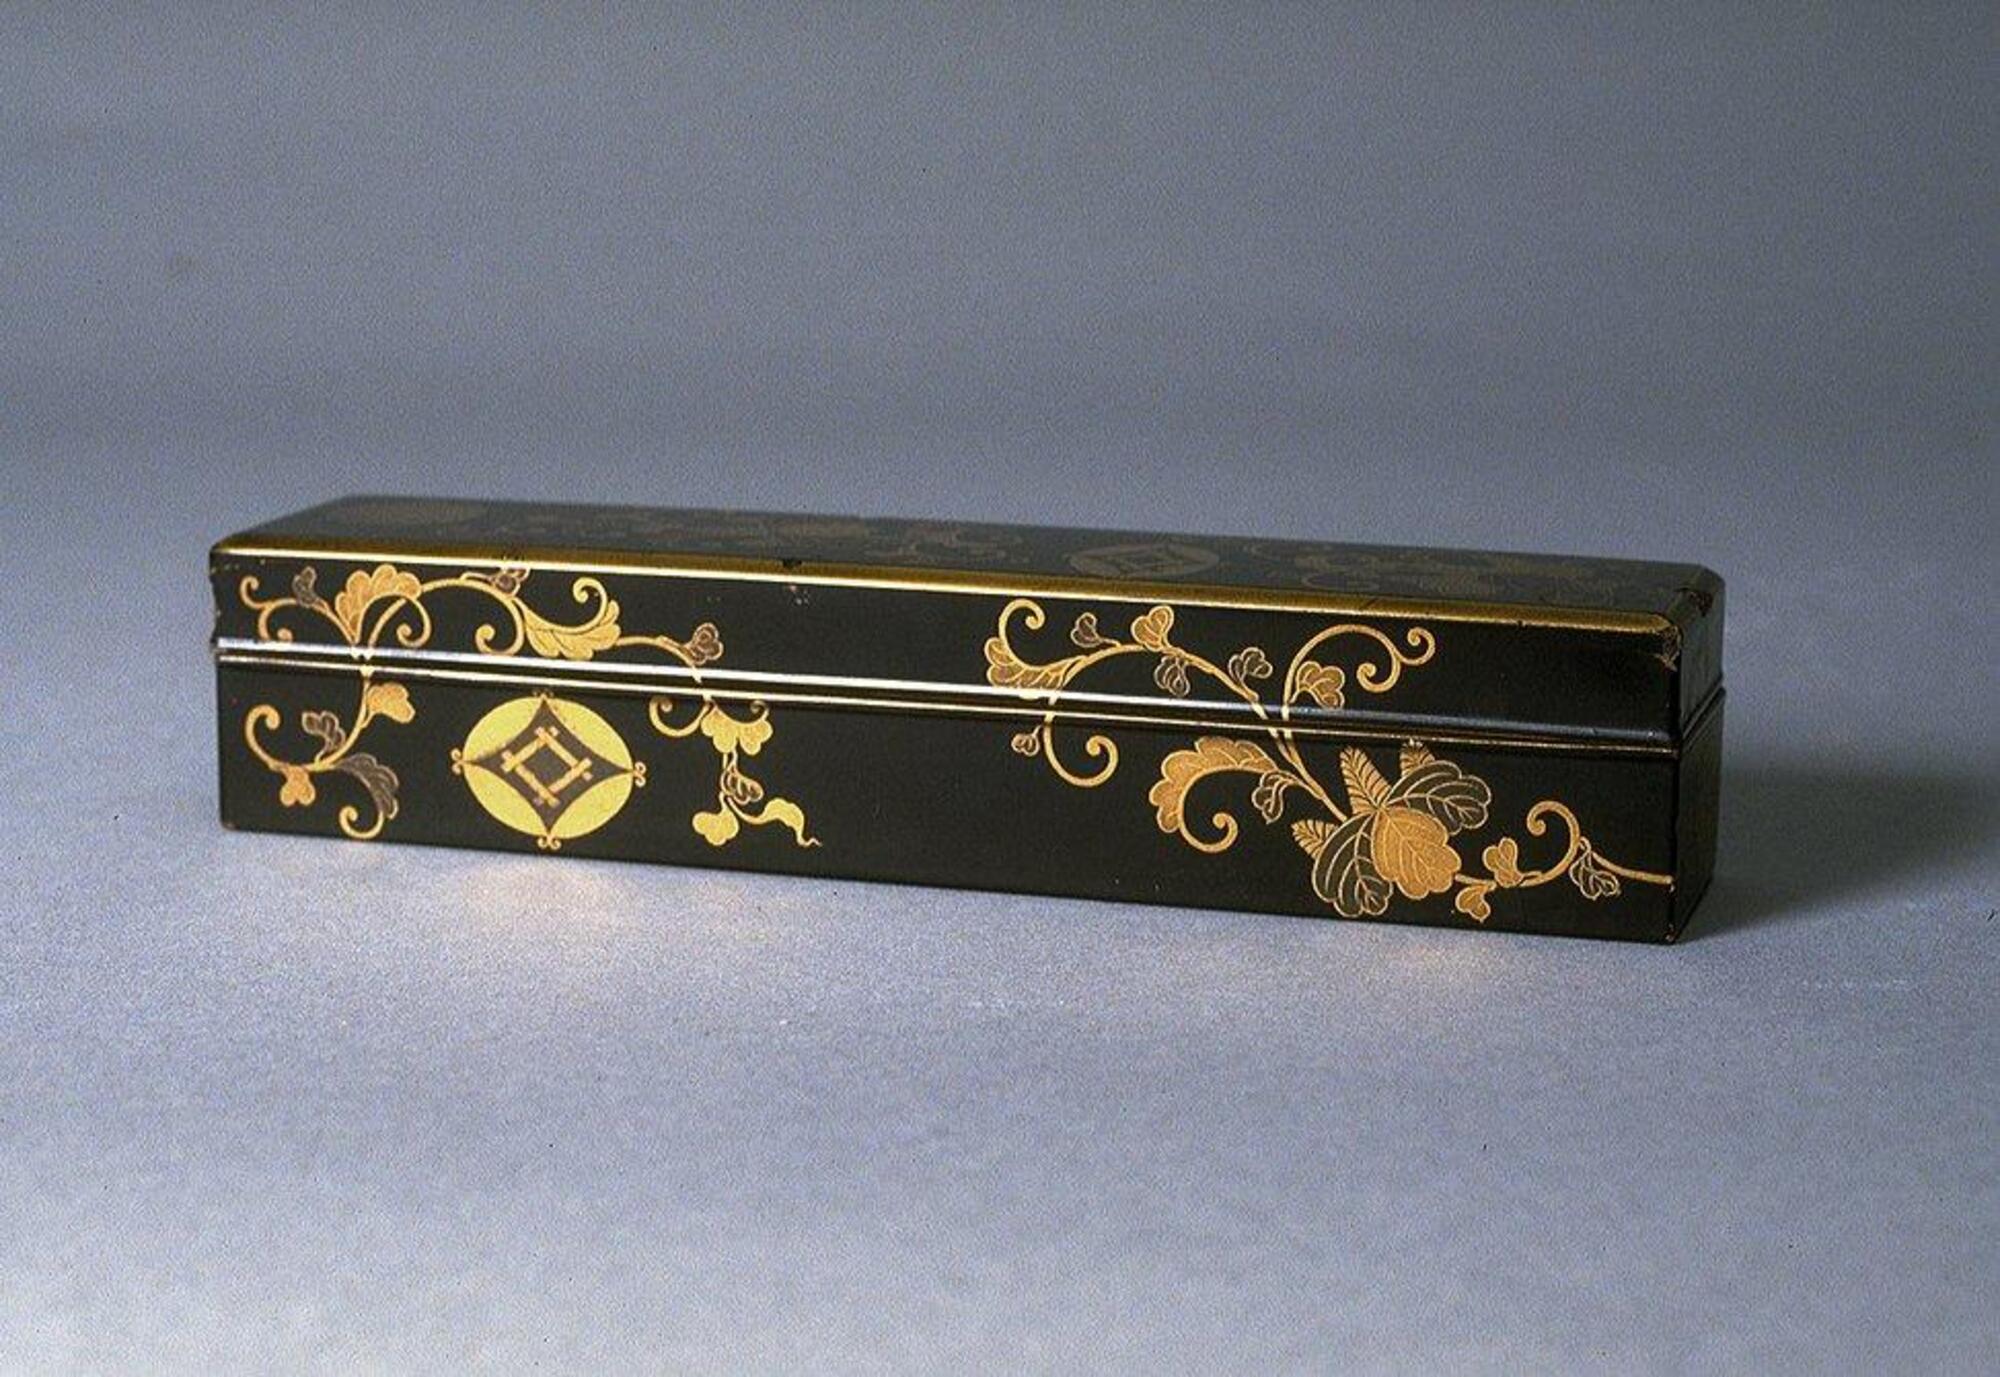 The long rectangular box is covered with an intricate floral pattern of gold on a black background in lacquer. Two house crests (one a geometric representation of a well and the other a chrysanthemum flower) appear in the design. Part of a bridal trousseau.